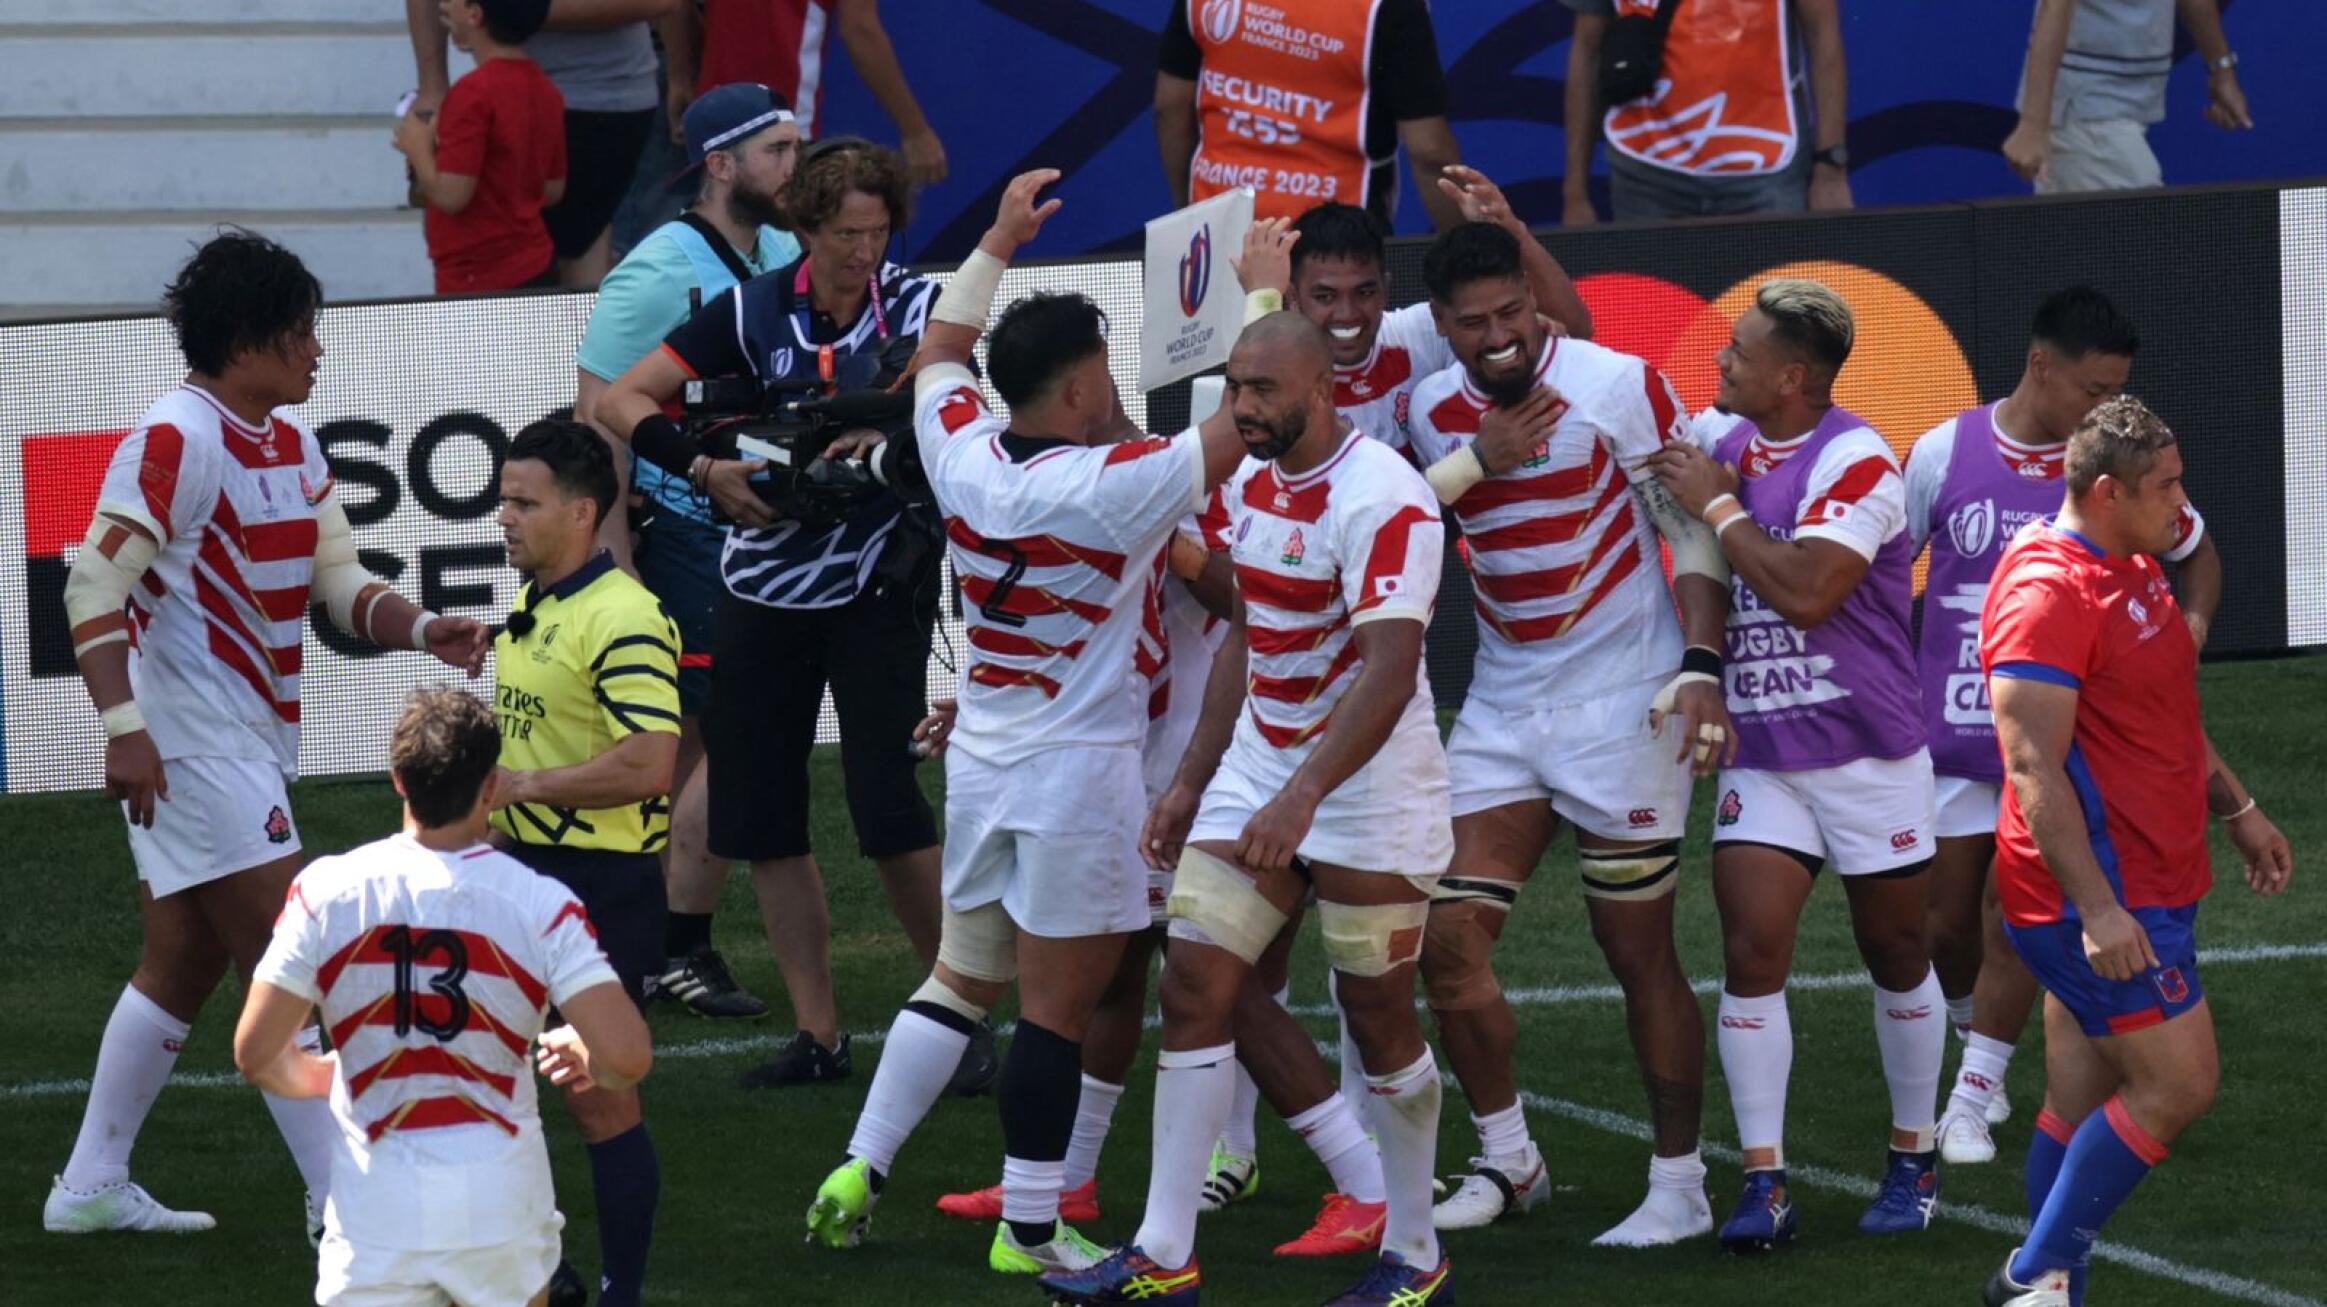 Japan players celebrate with lock Amato Fakatava after he scored their third try during their Rugby World Cup Pool D match against Chile